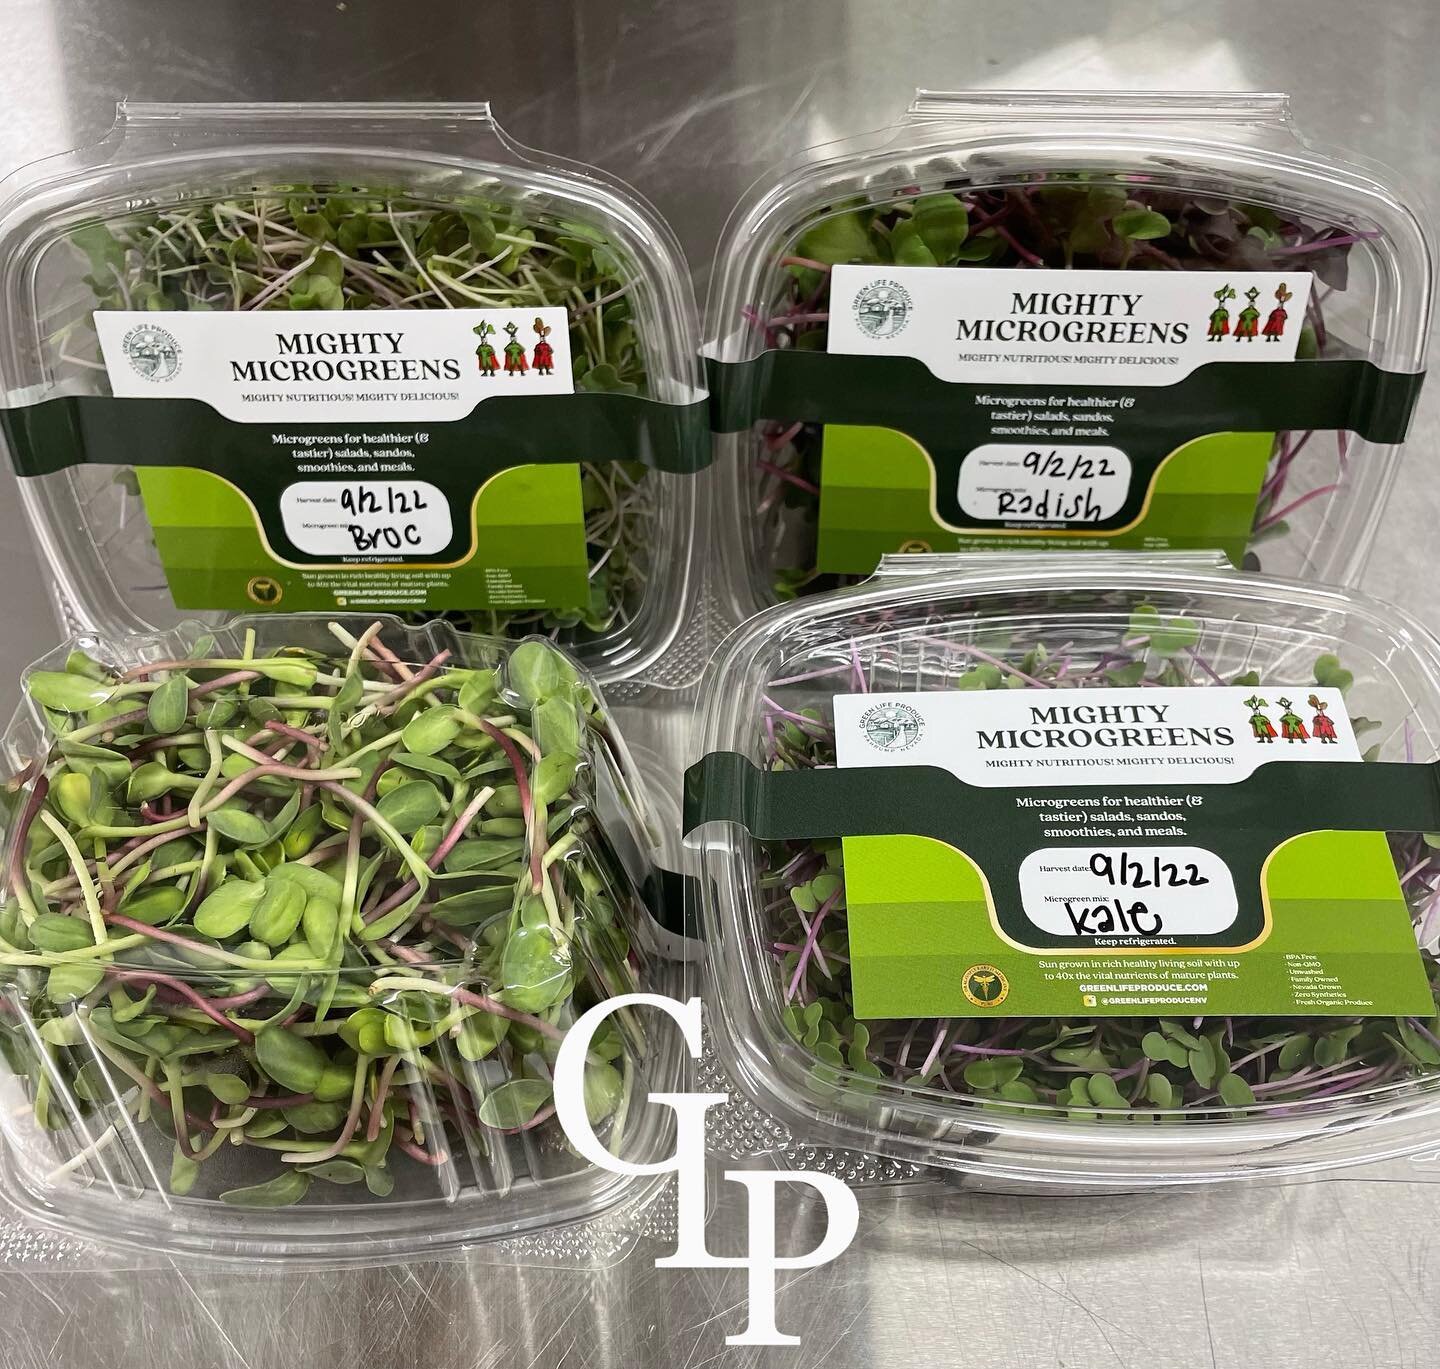 Come see us today and pick up some Microgreens 🙌🌱 available in pea shoots, broccoli, radish, kale &amp; NEW sunflower shoots #GLP #pahrump #localgrown #alwaysorganic